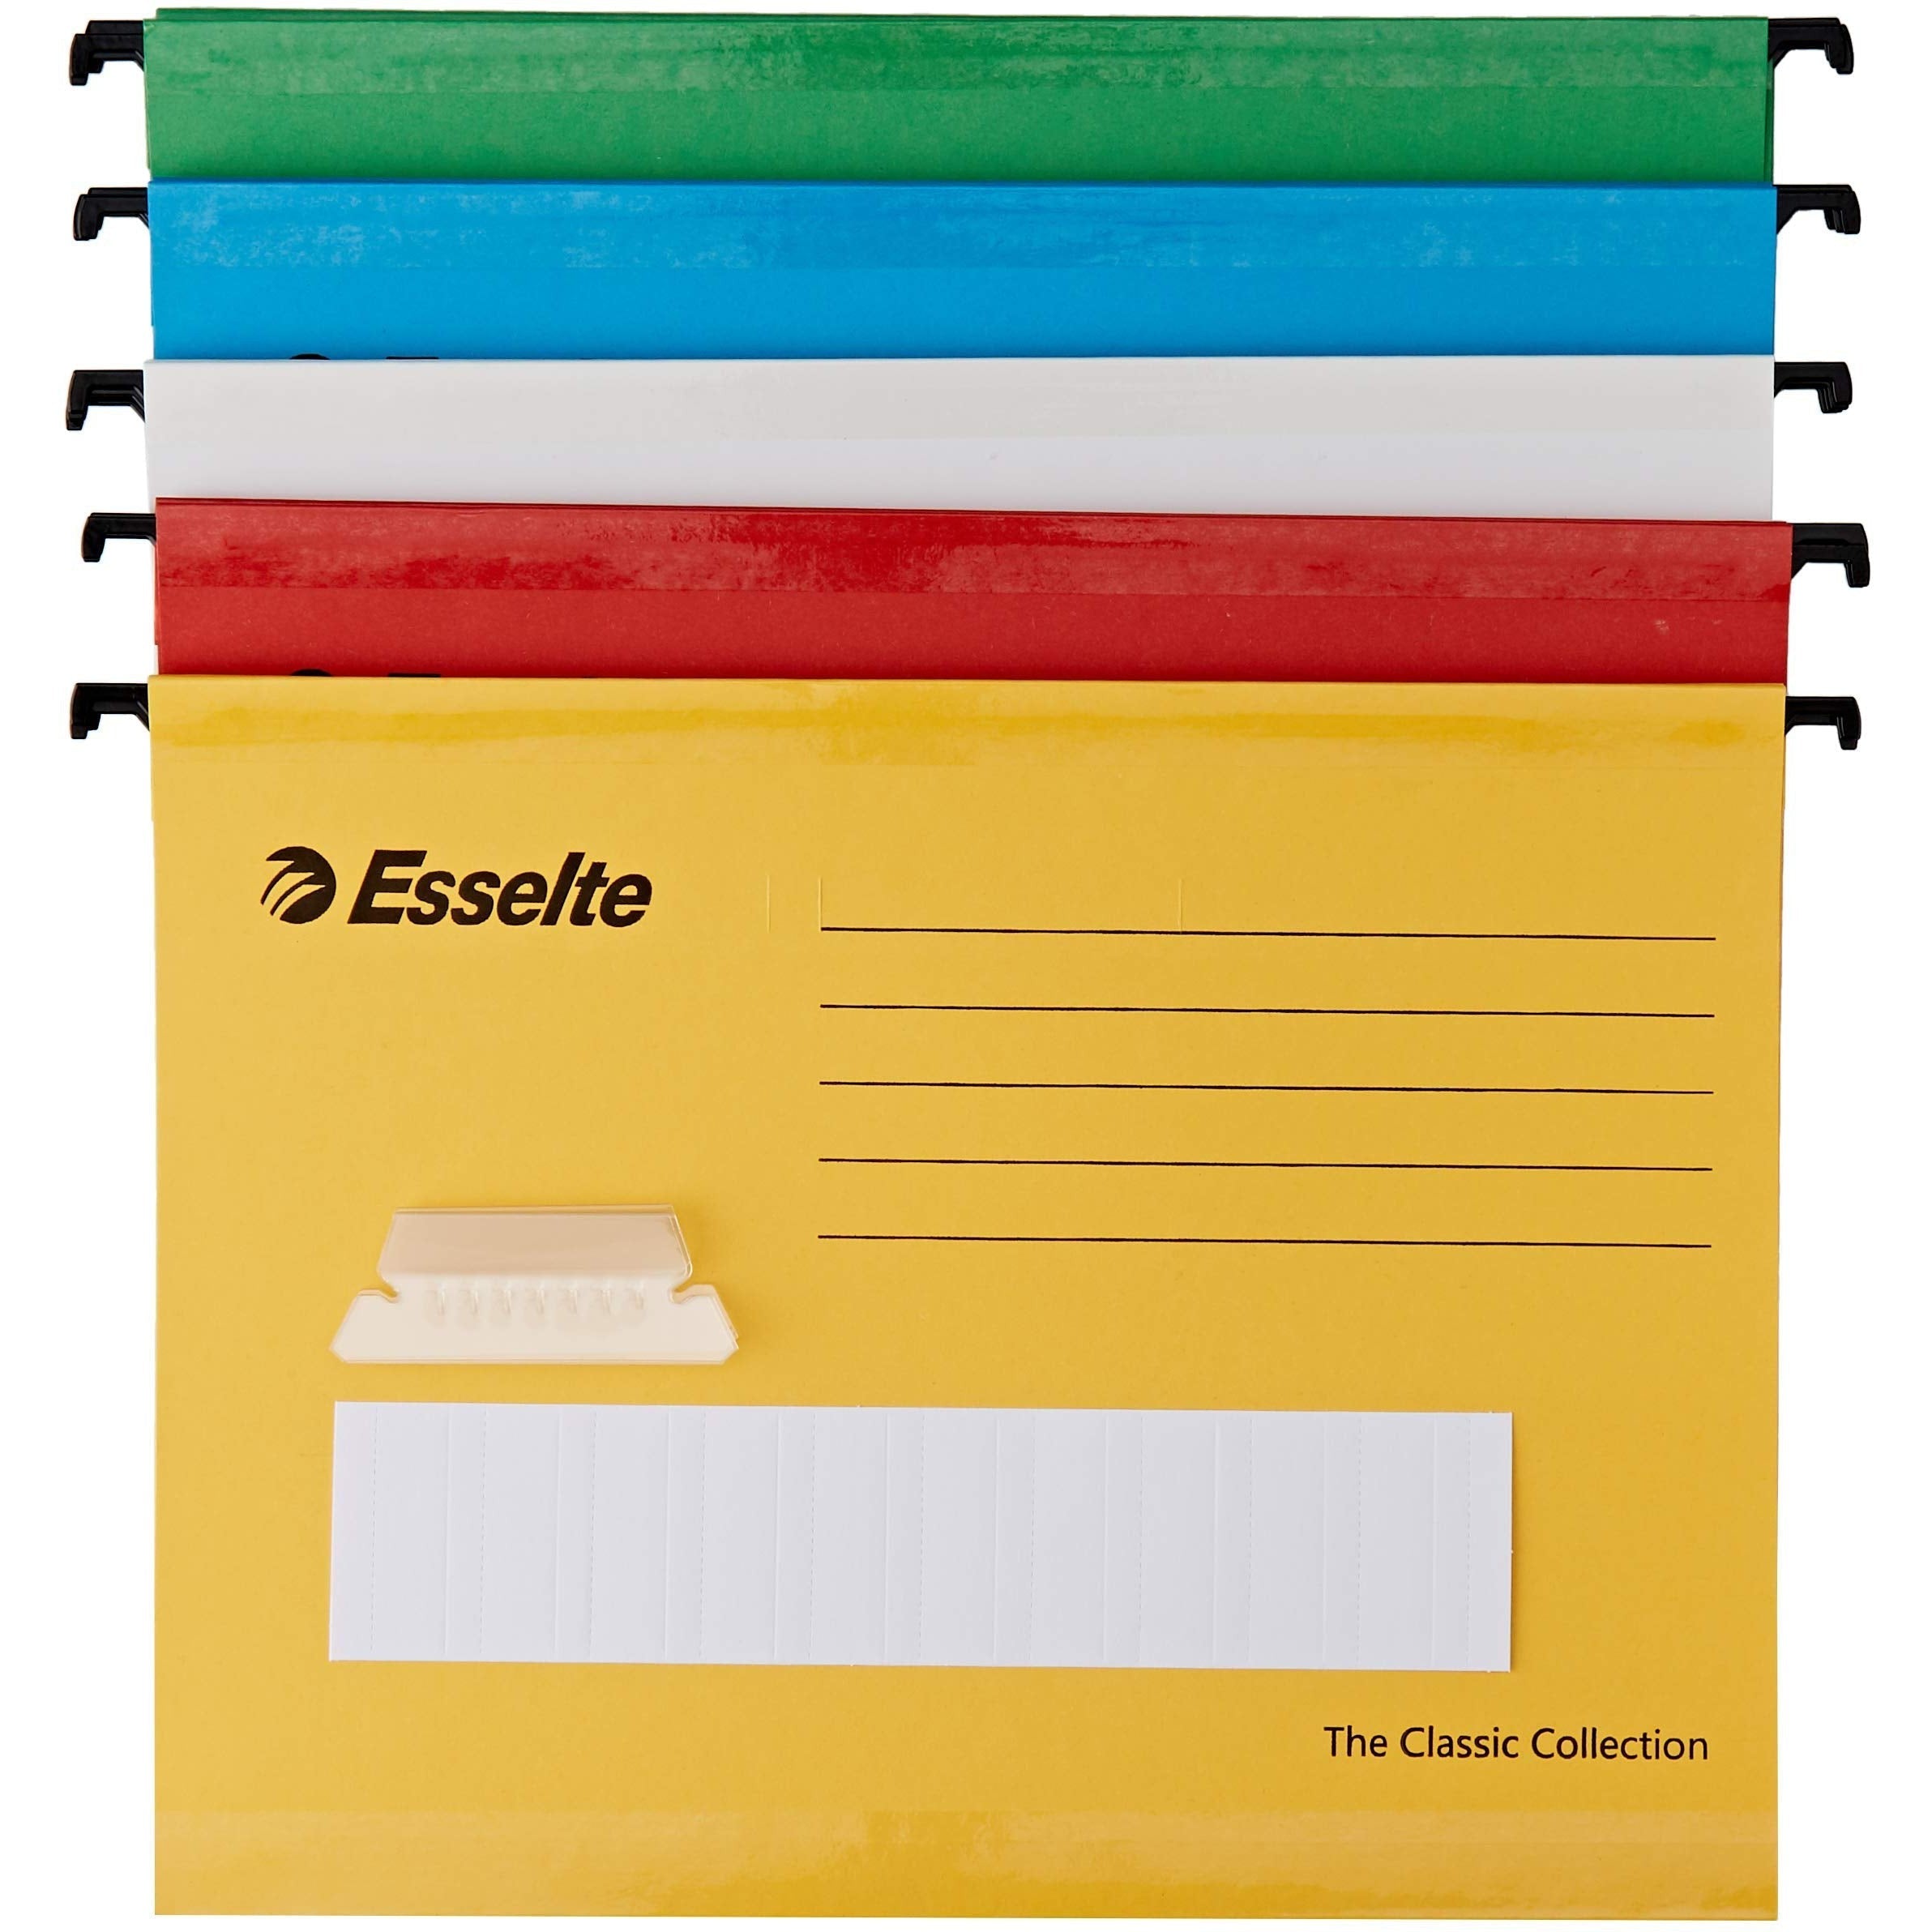 Esselte Hanging File 25Pcs/Box-Filiing Accessories-Other-Star Light Kuwait